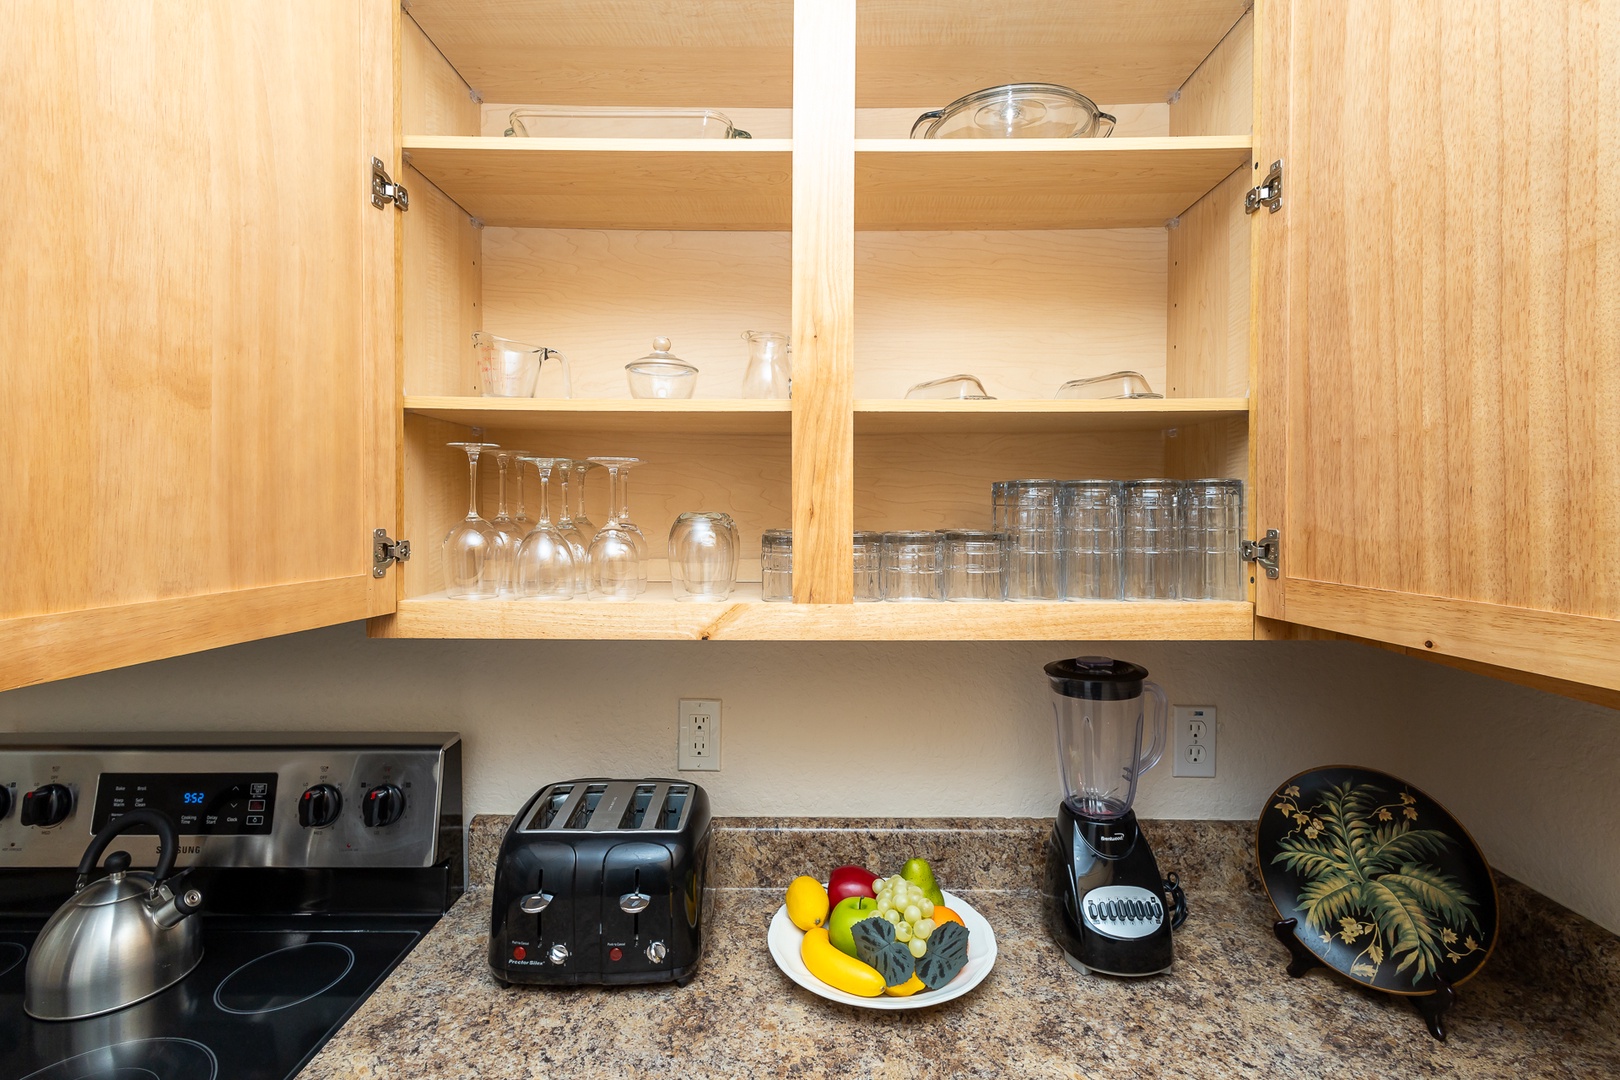 The kitchen comes fully equipped to whip up your favorite meals